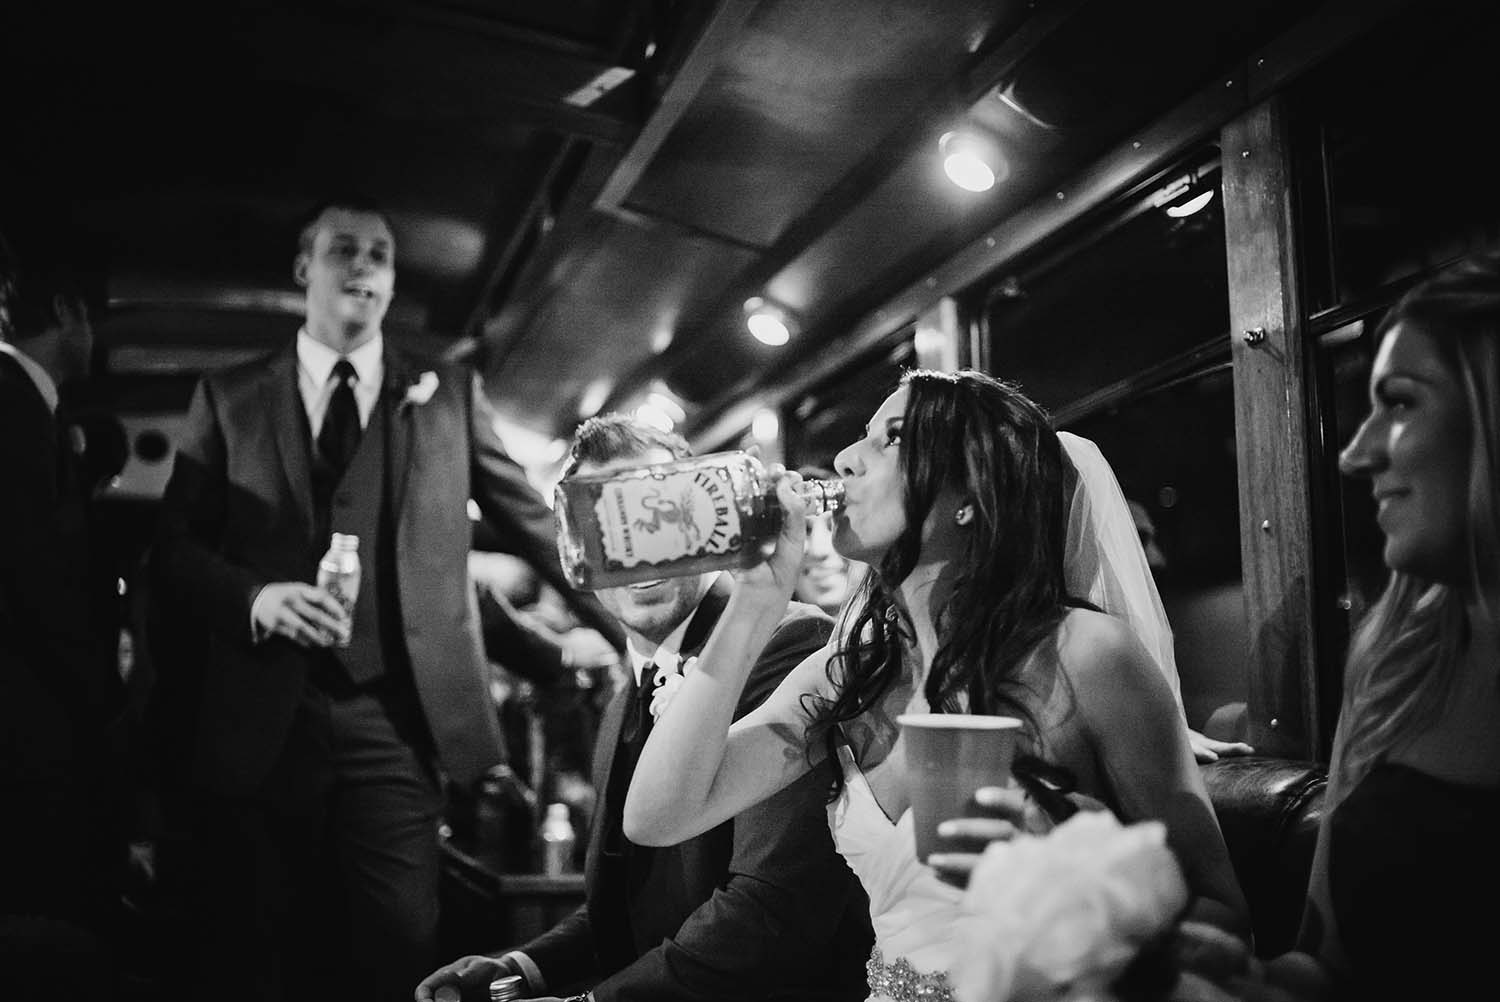 San Antonio bride drinking gin on bus after tying the knot on a winter's day